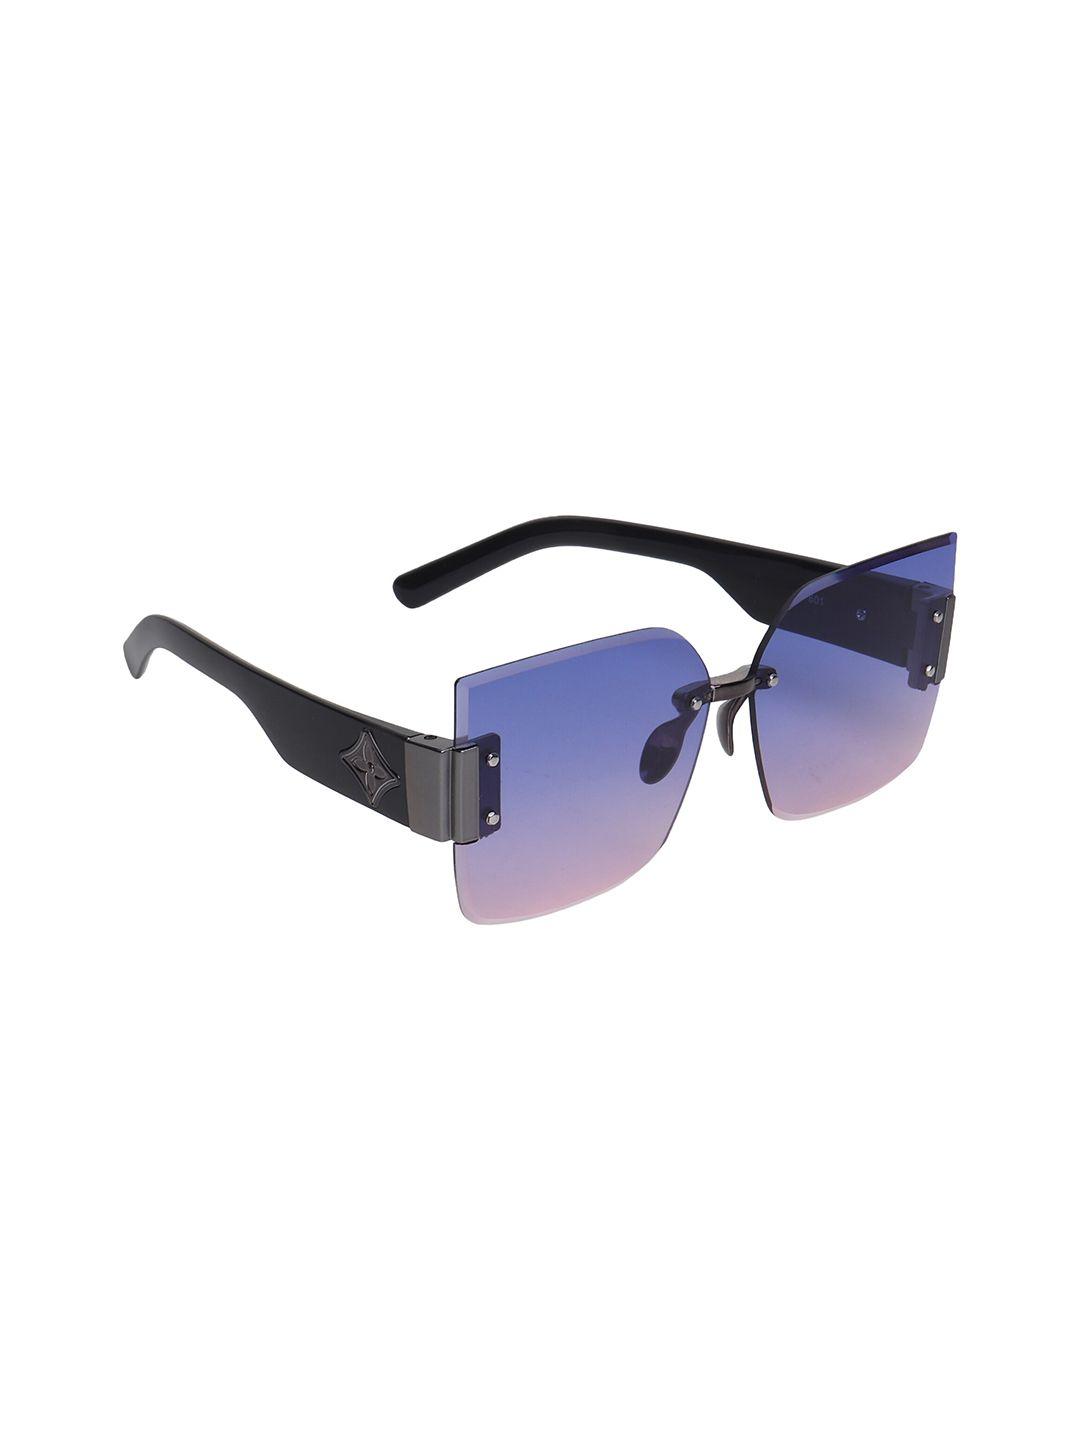 swiss design lens & butterfly sunglasses with uv protected lens sdsg-610-01